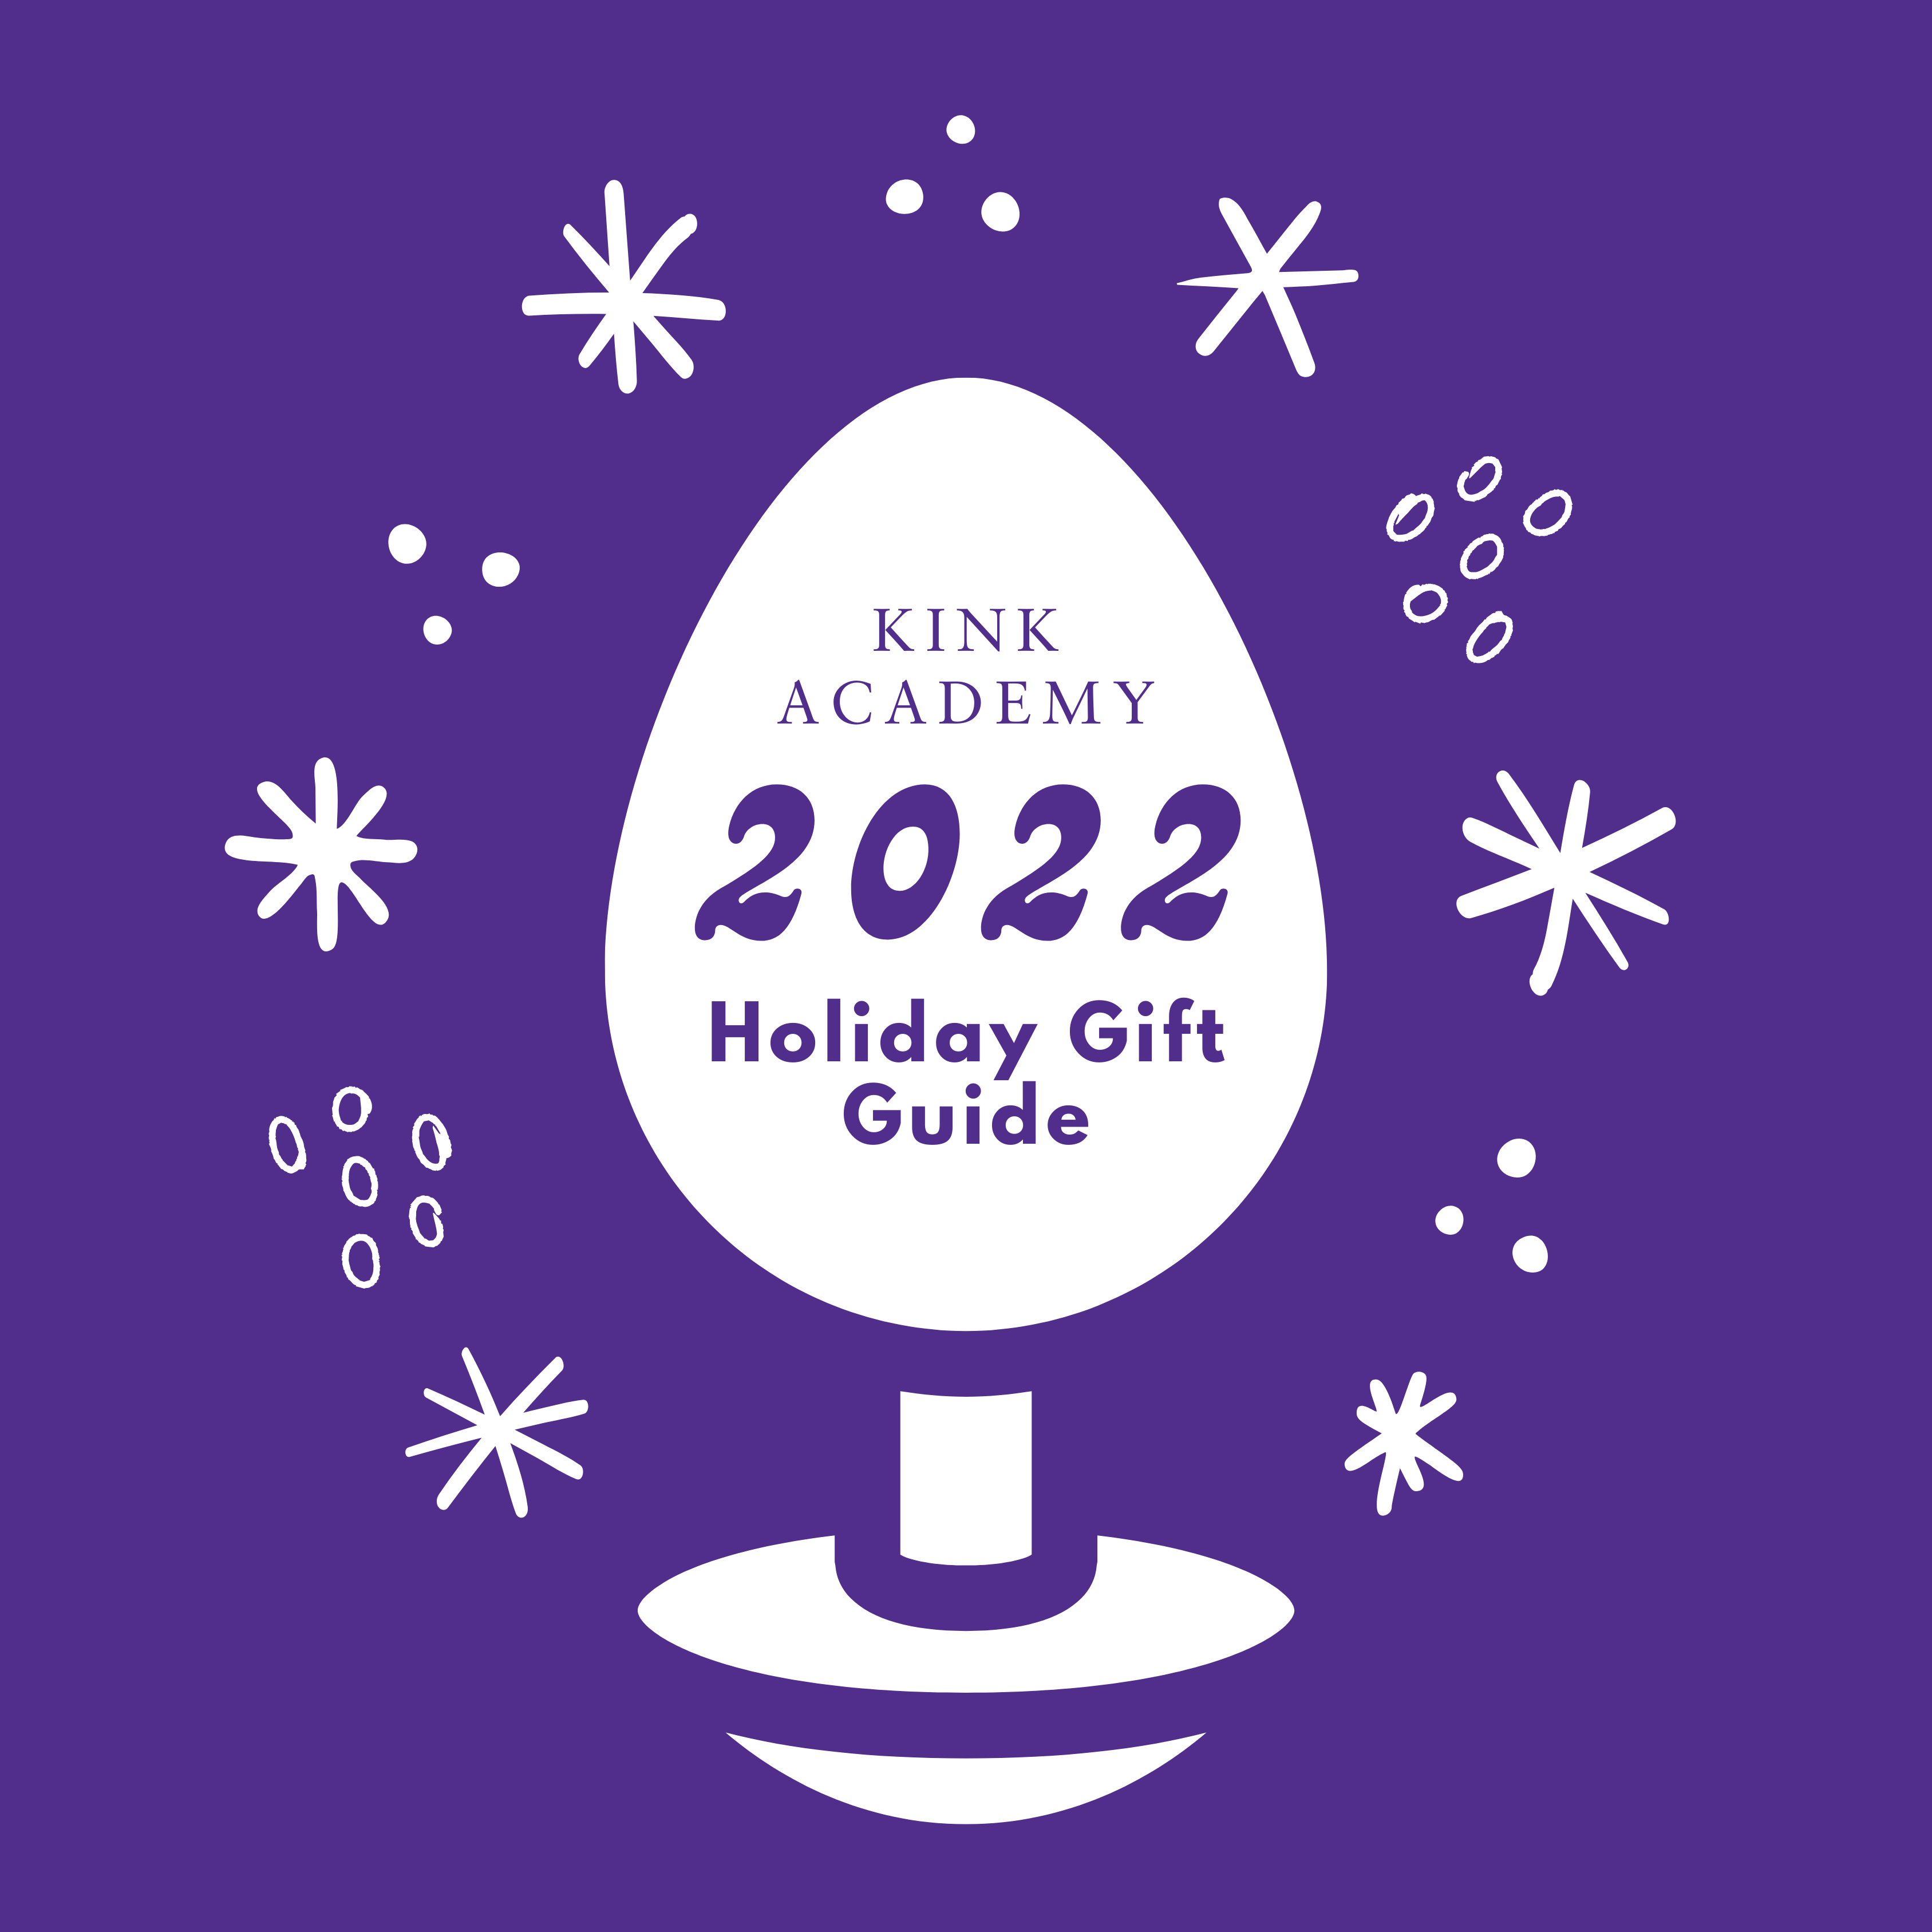 Kink Academy 2022 Holiday Gift Guide